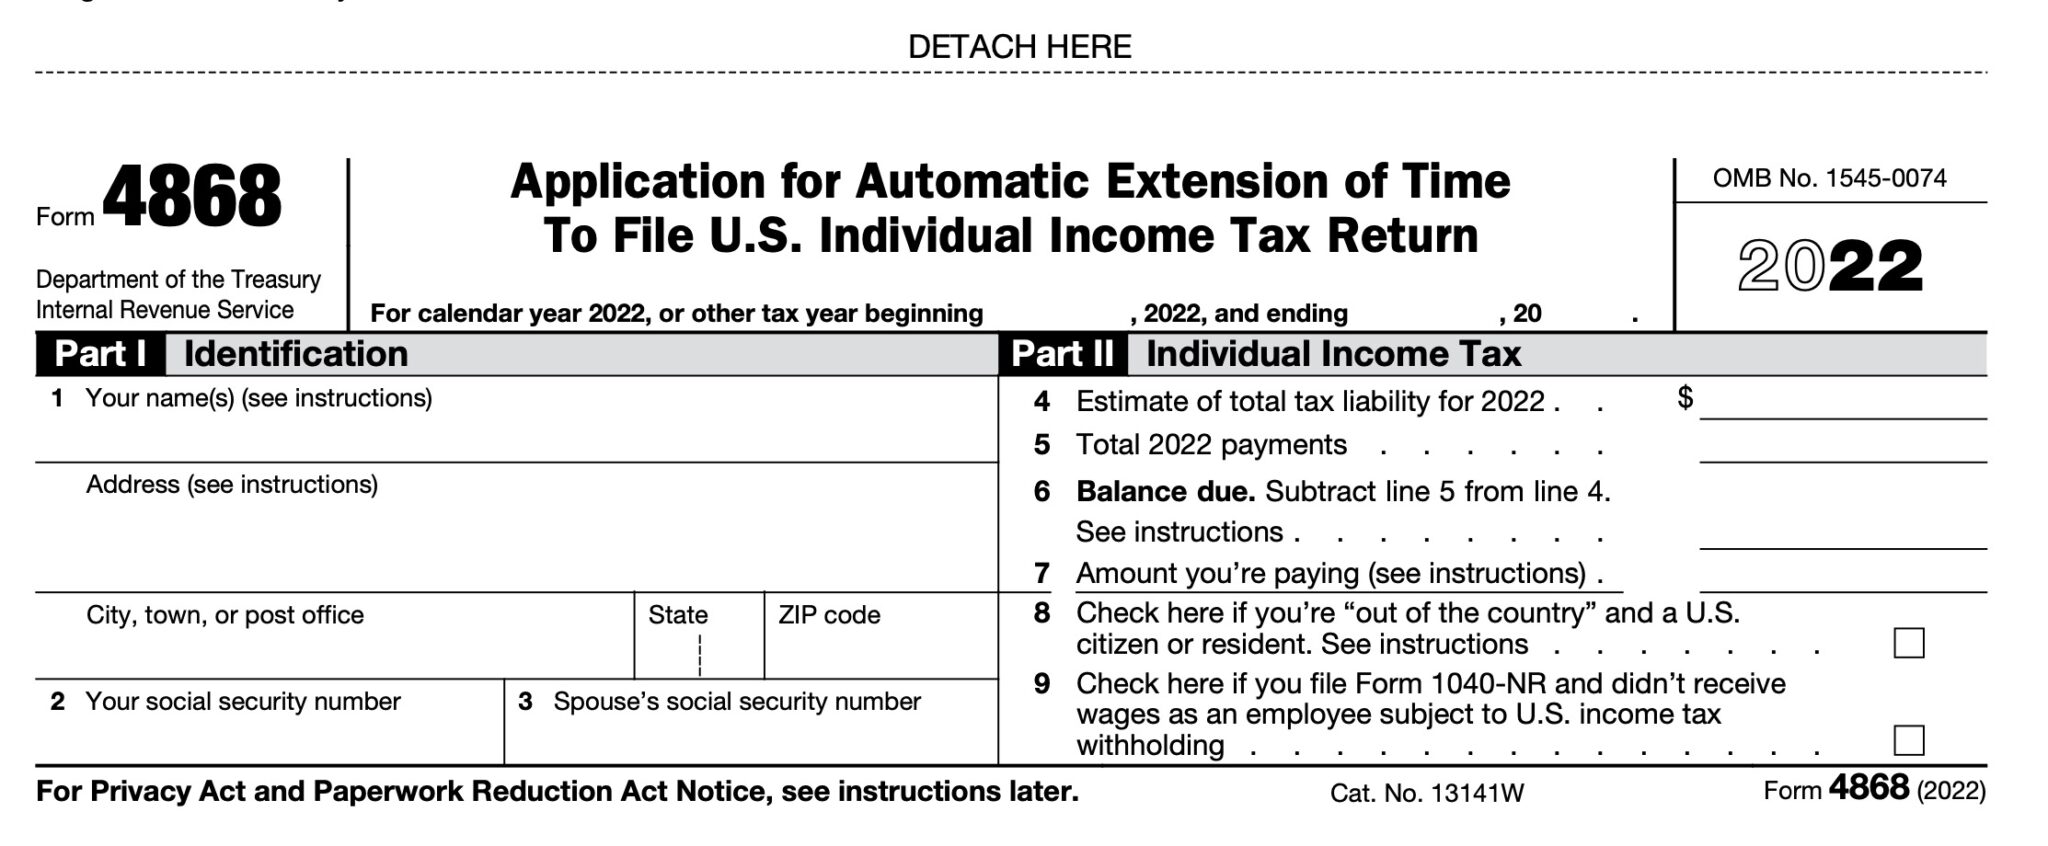 How to Get a Tax Extension Online and Avoid Late Filing Penalties